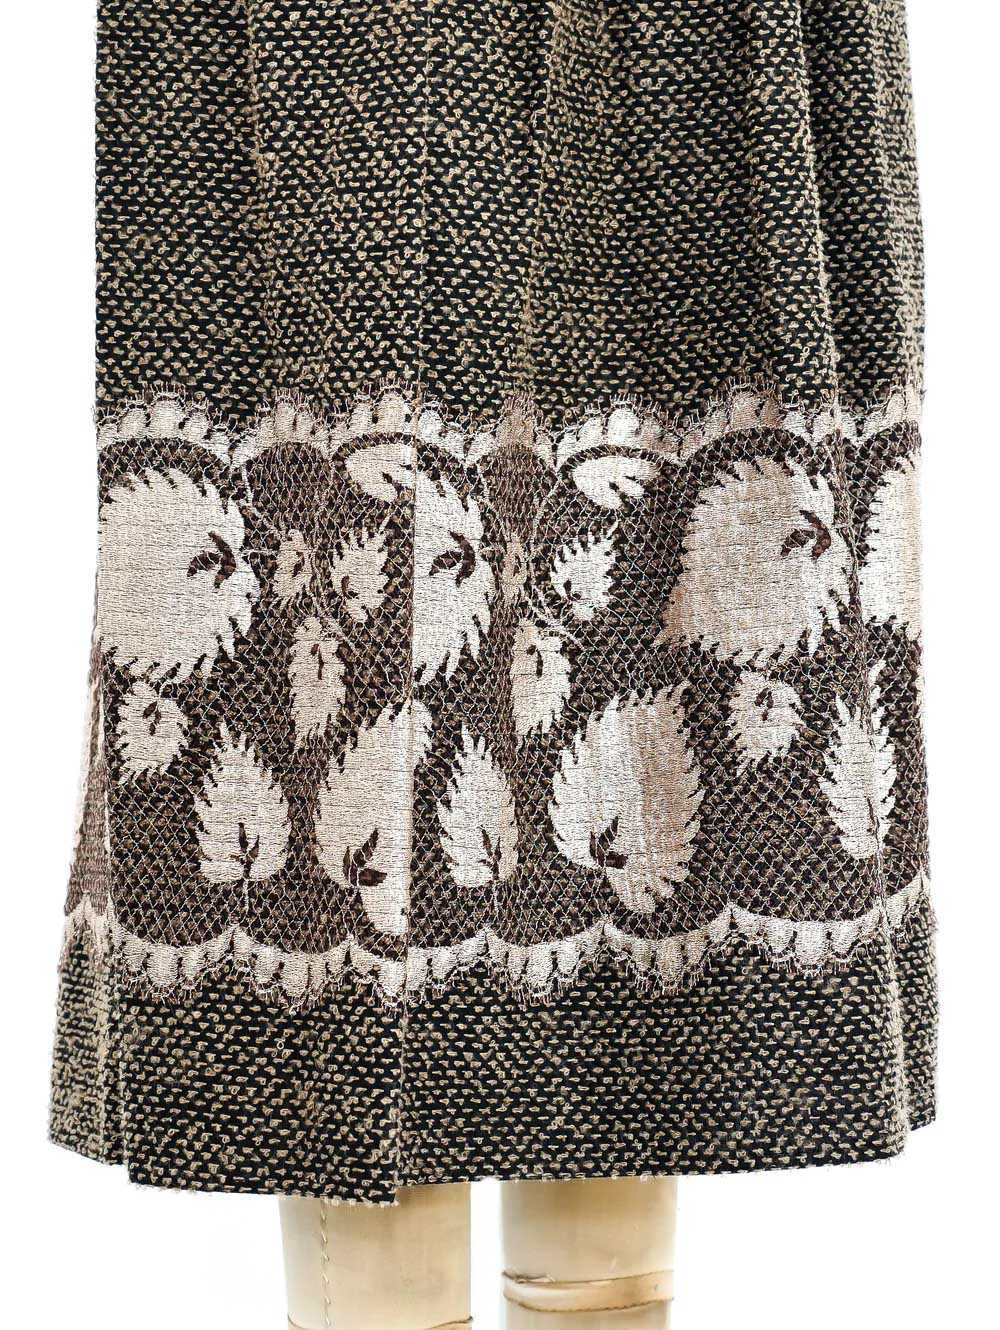 Geoffrey Beene Tweed and Lace Skirt Ensemble - image 2